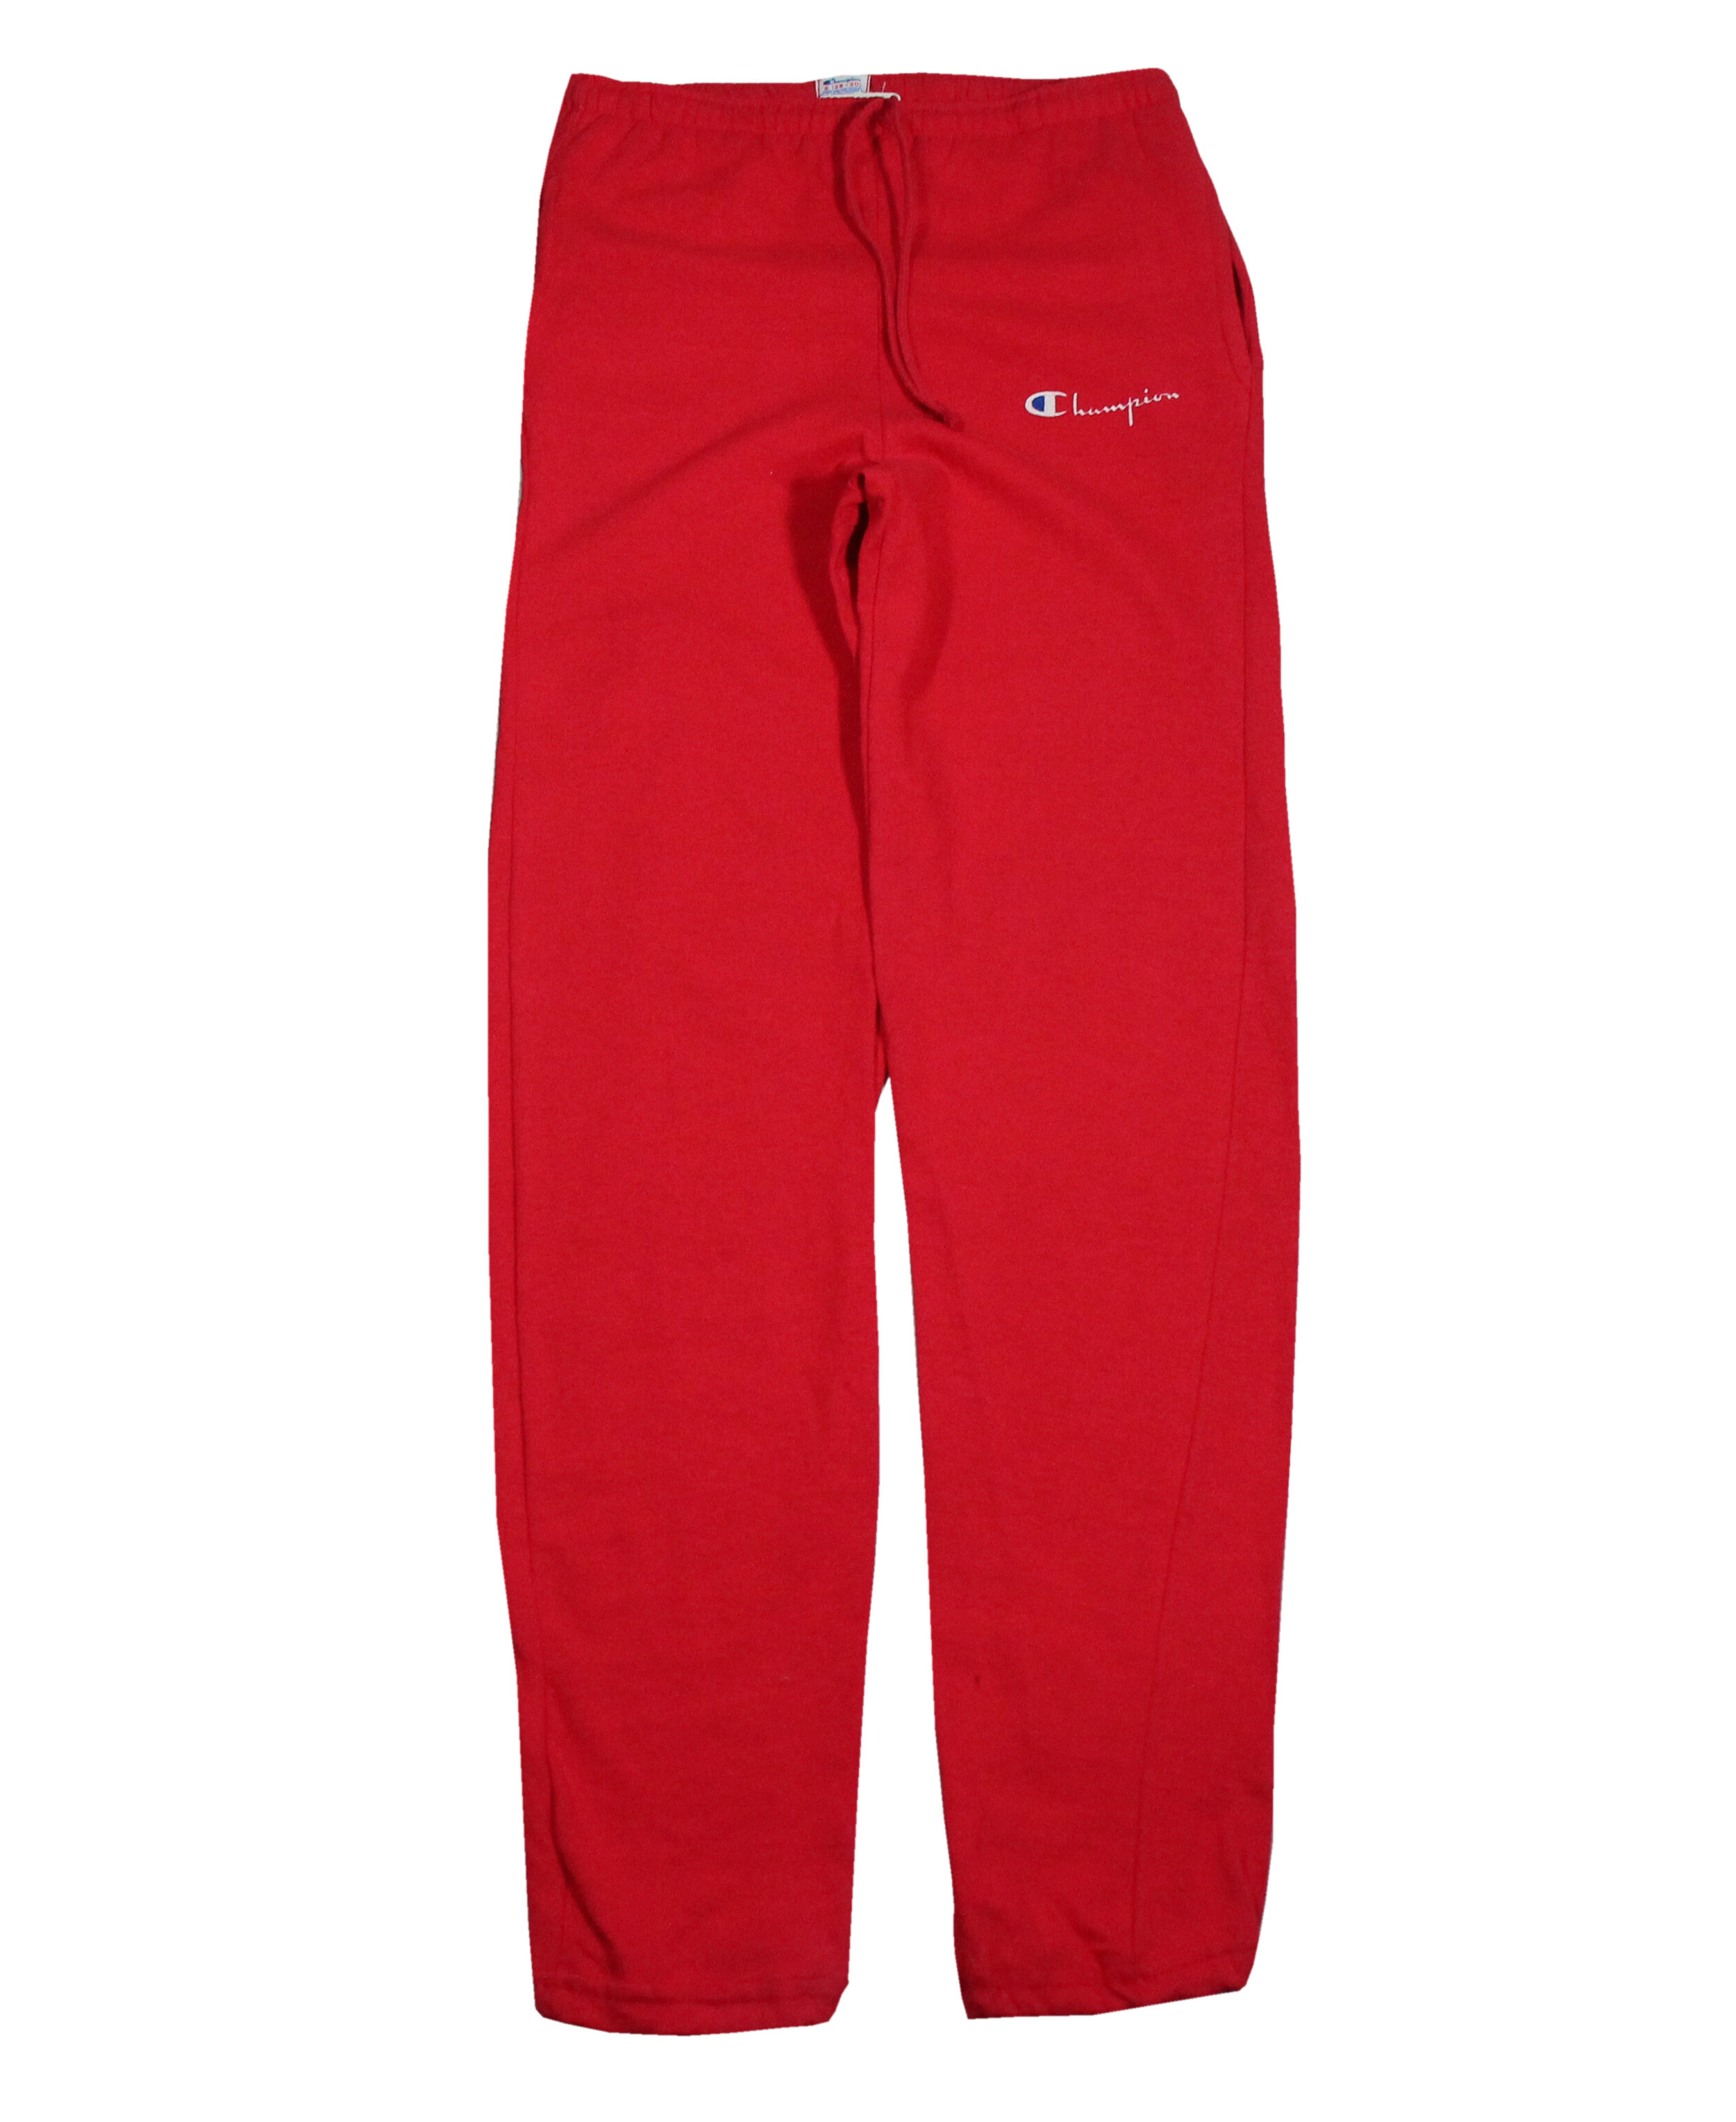 Vintage Champion Red Thin Sweatpants (Size S) NWT — Roots